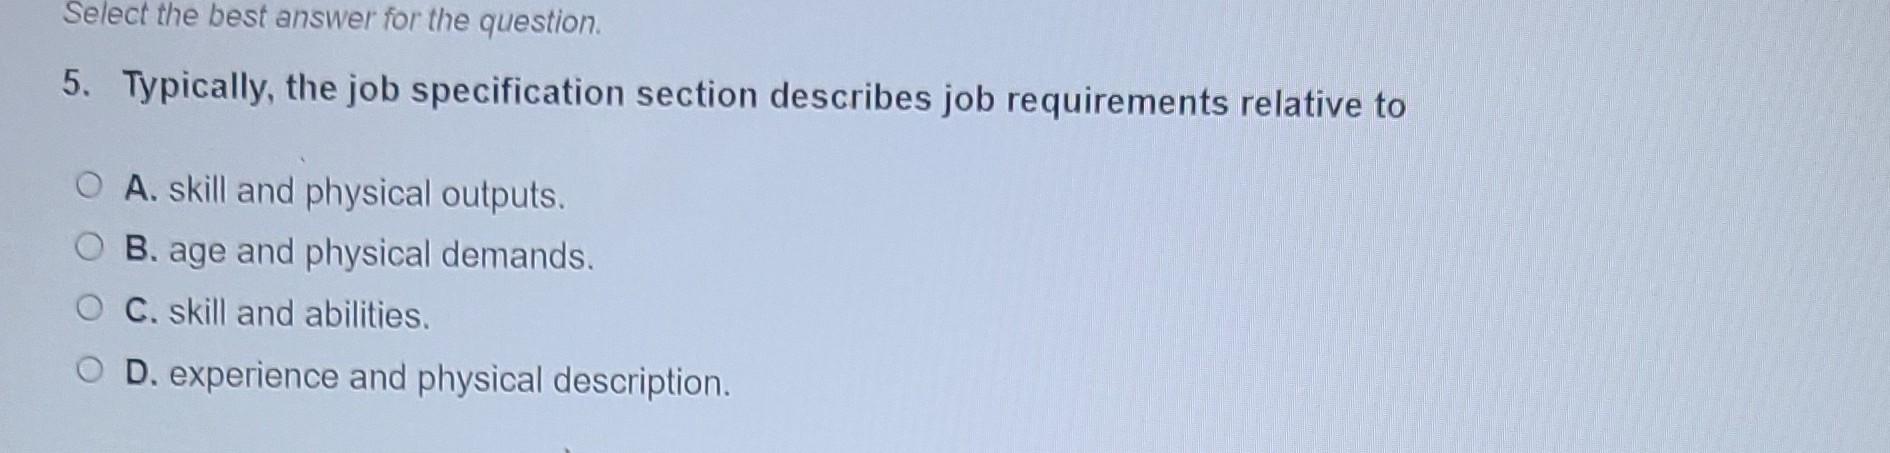 Select the best answer for the question. 5. Typically, the job specification section describes job